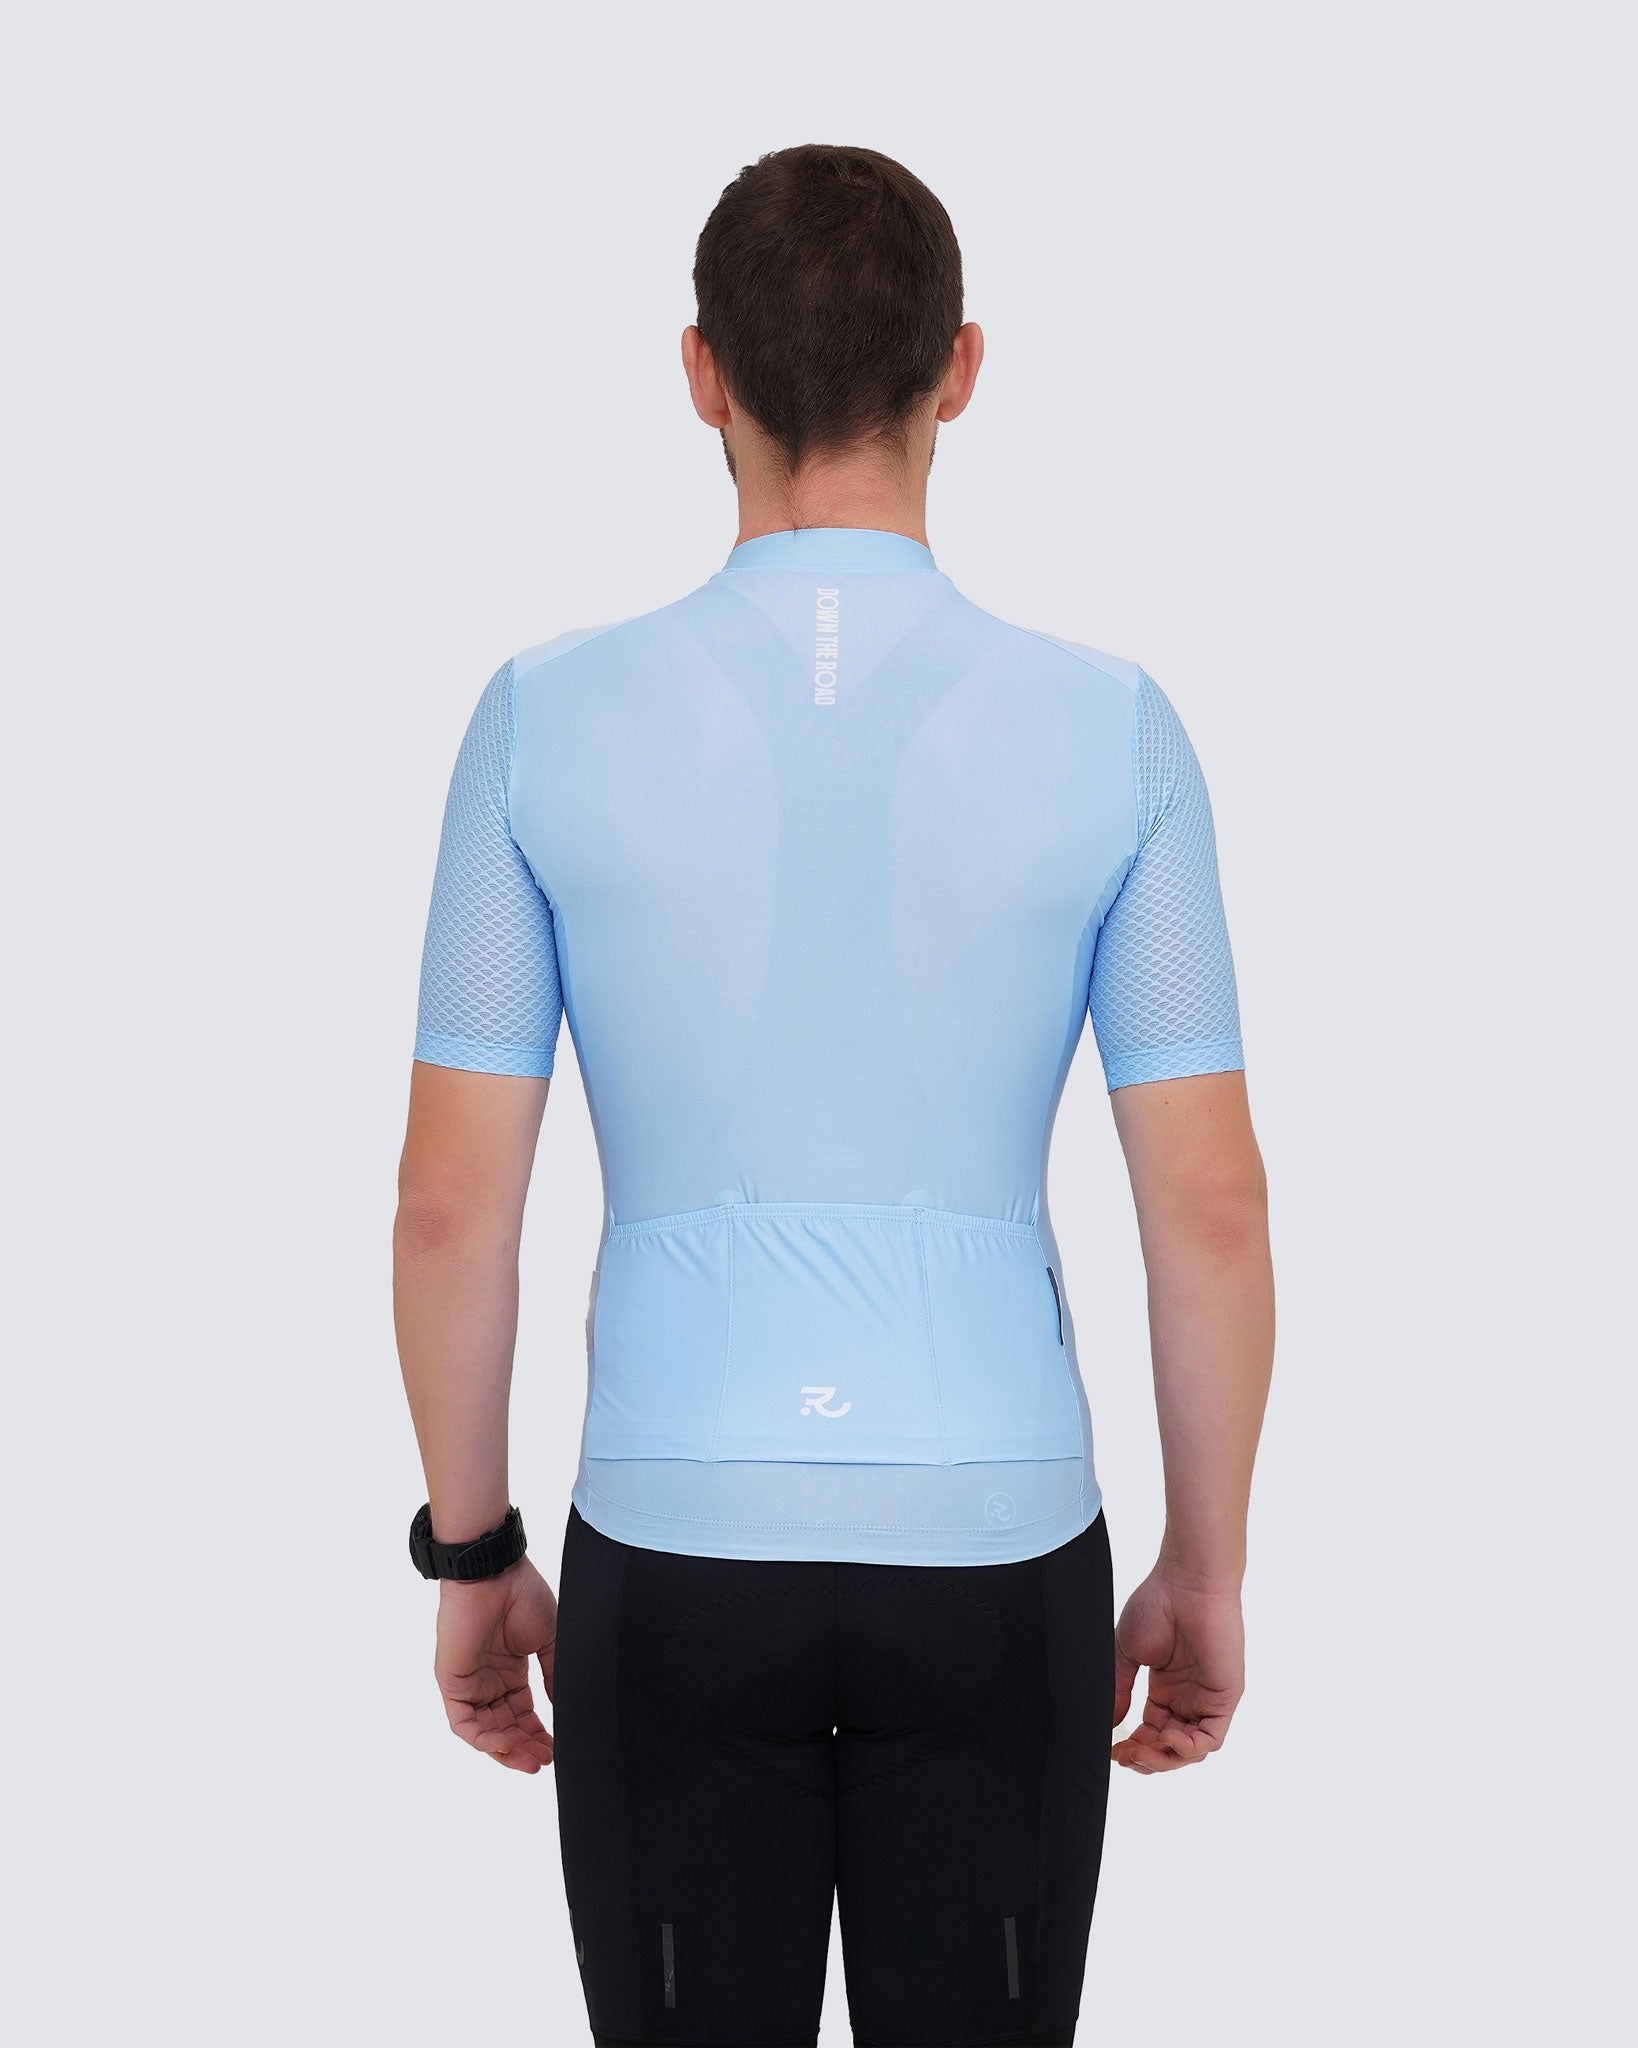 nature blue cycling jersey men back view